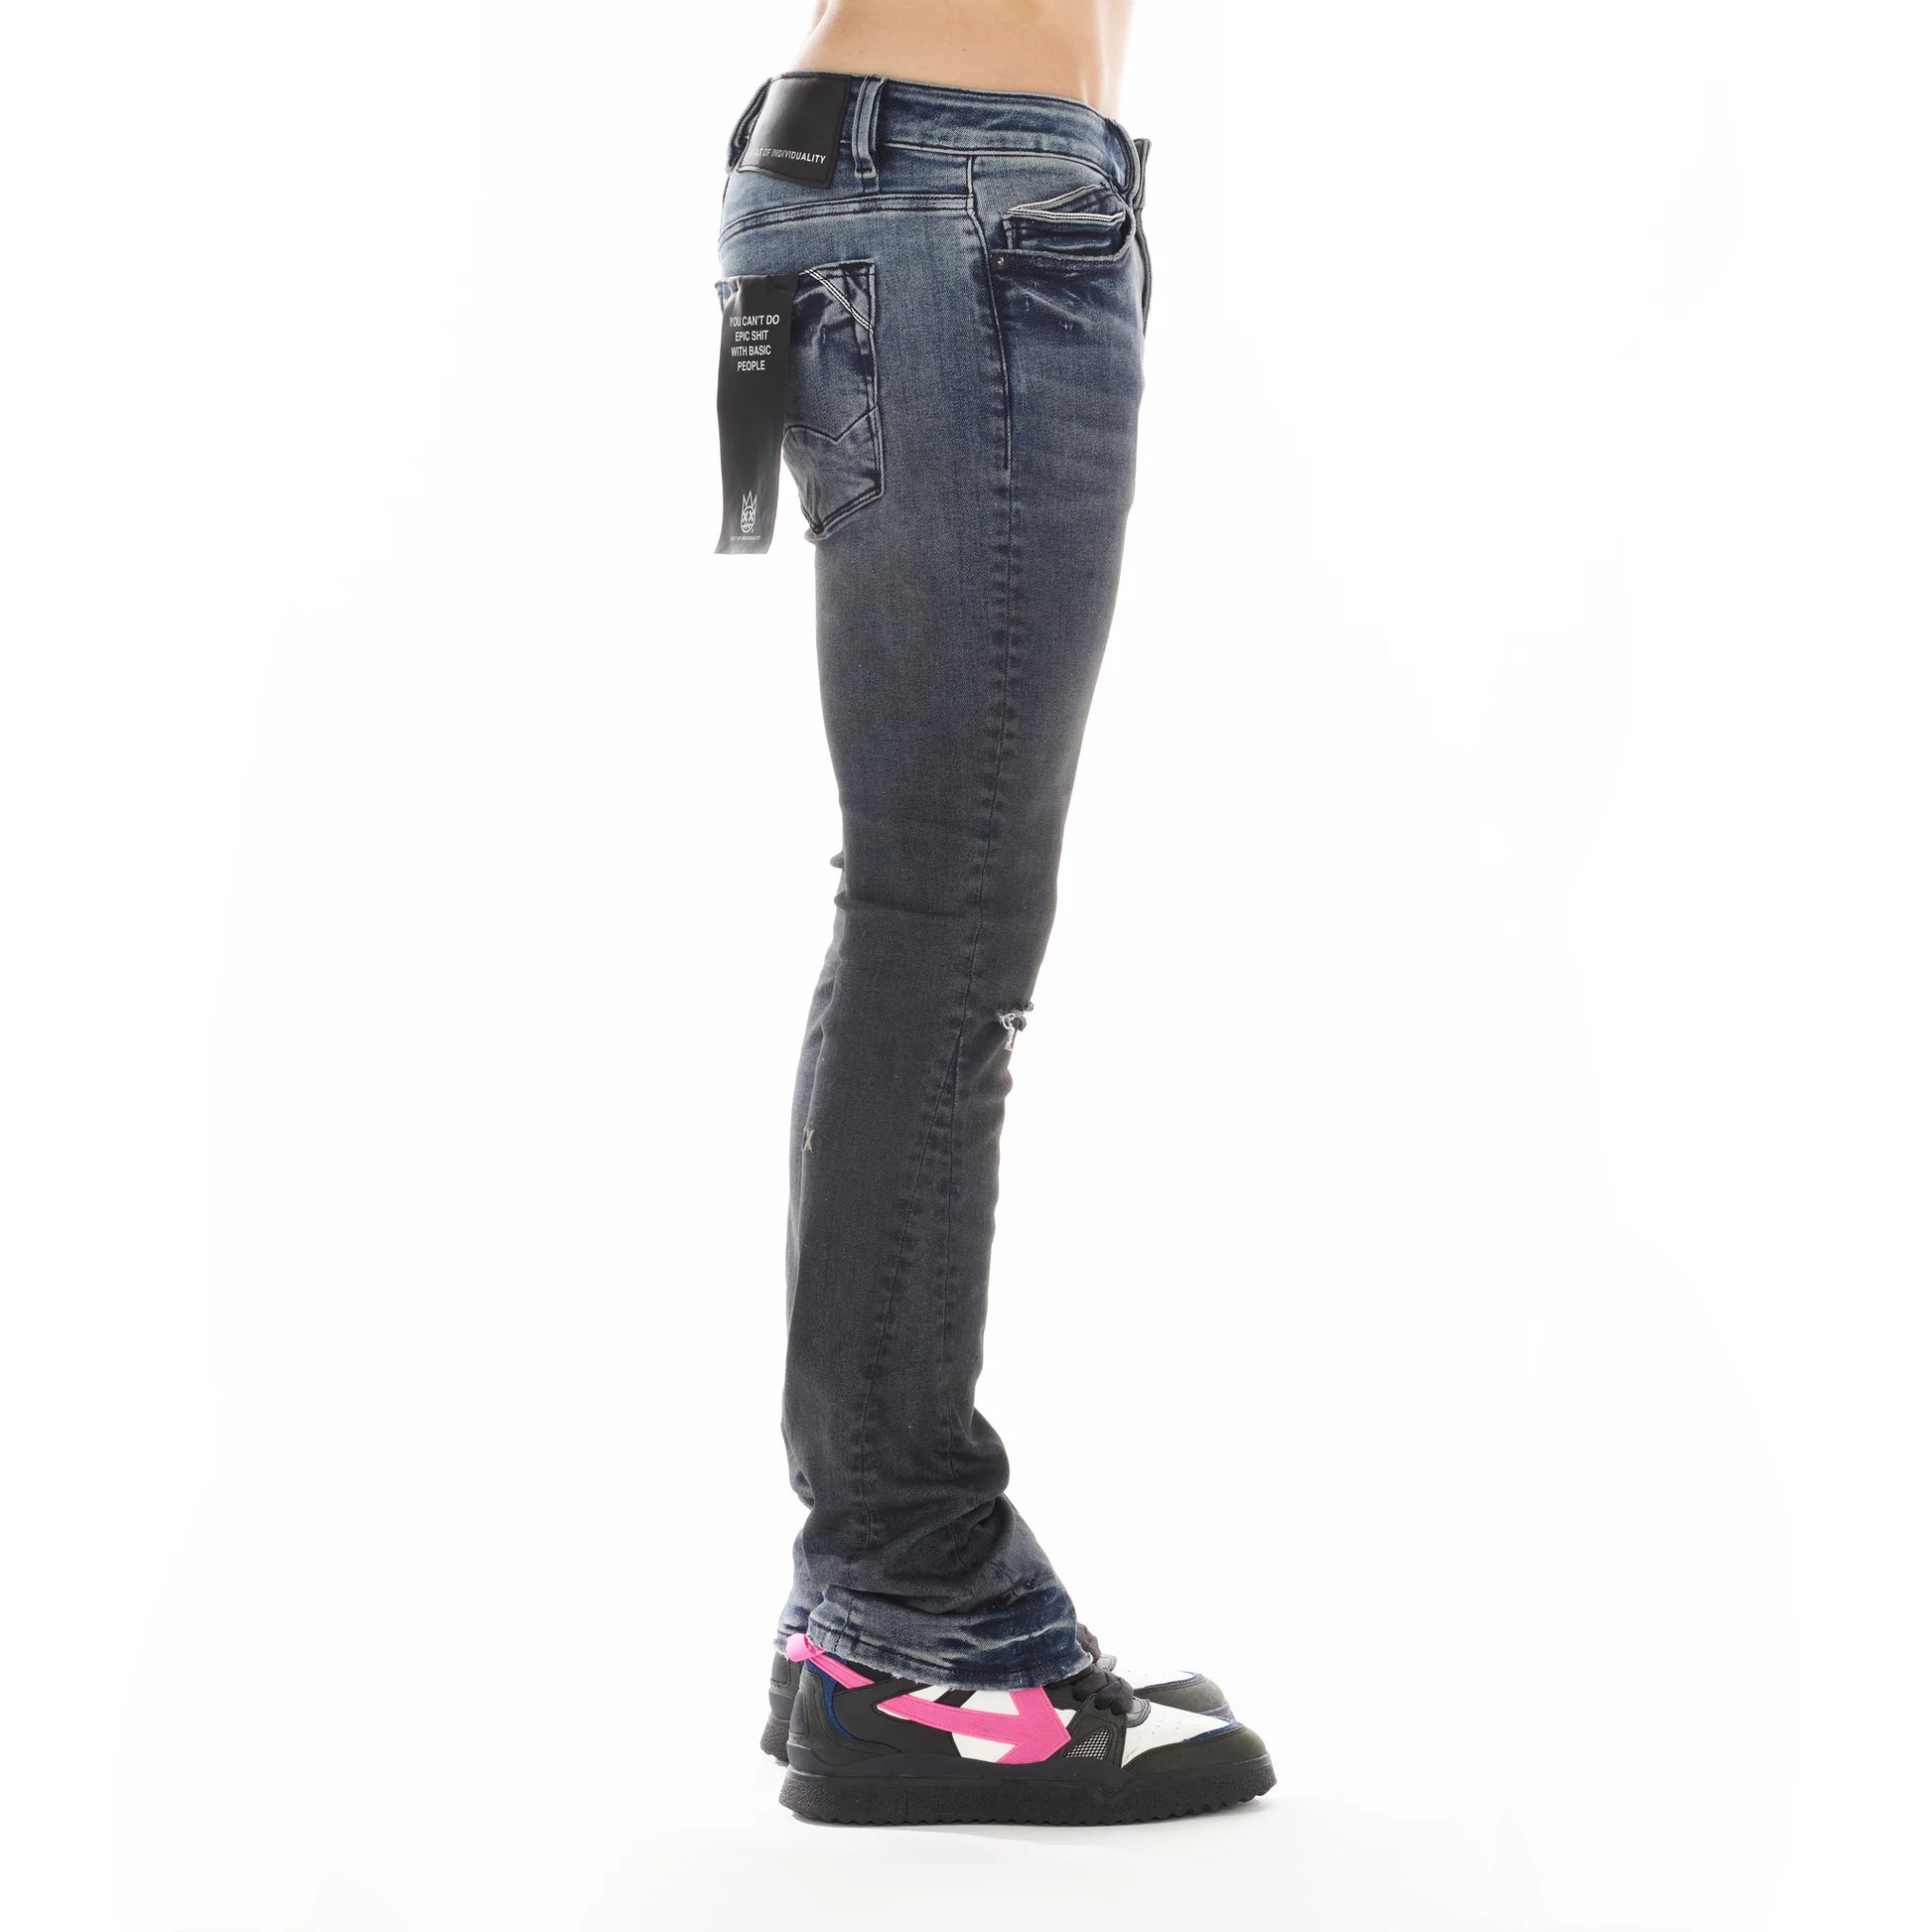 Side view of person wearing Lenny Bootcut in Billie jeans, highlighting the wider leg design and unique accents like the contrasting black inset for added style